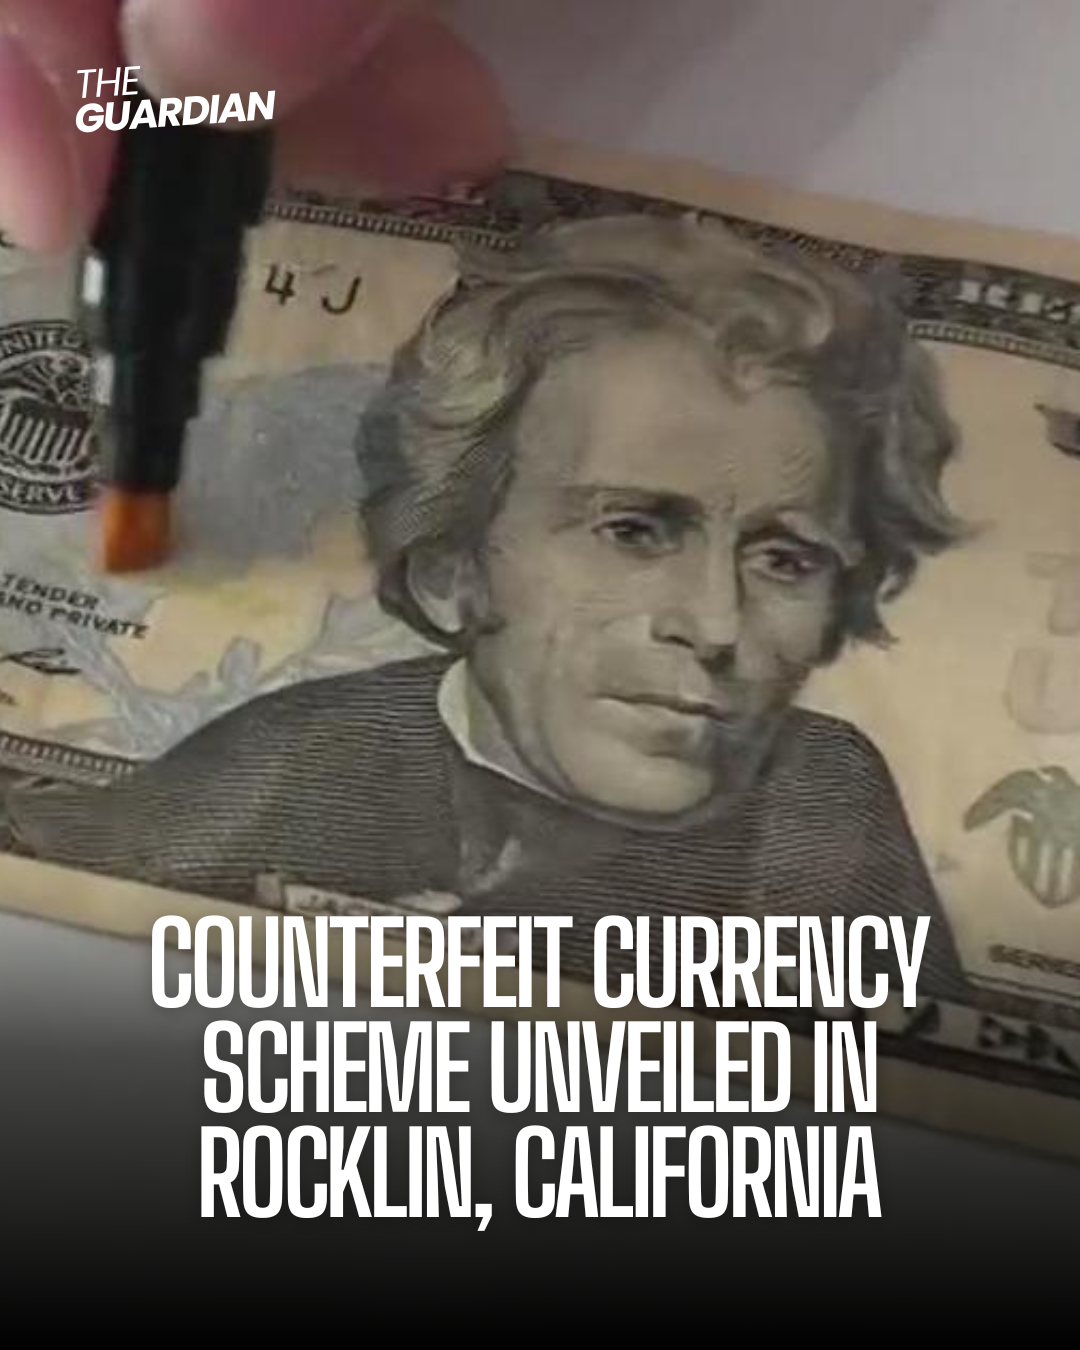 Rocklin police alert the US Secret Service after discovering a considerable amount of counterfeit money.